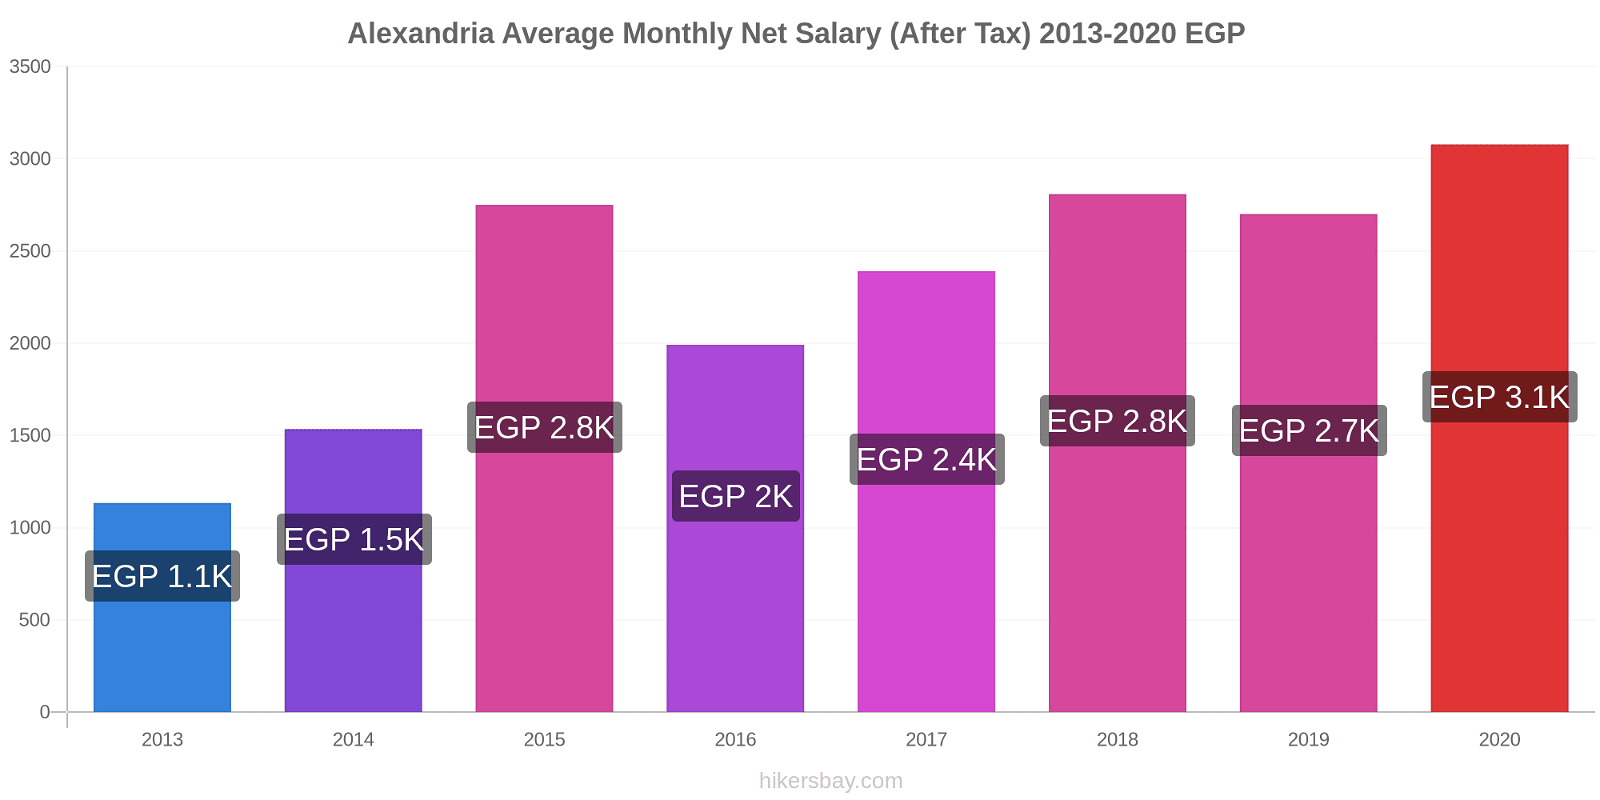 Alexandria price changes Average Monthly Net Salary (After Tax) hikersbay.com